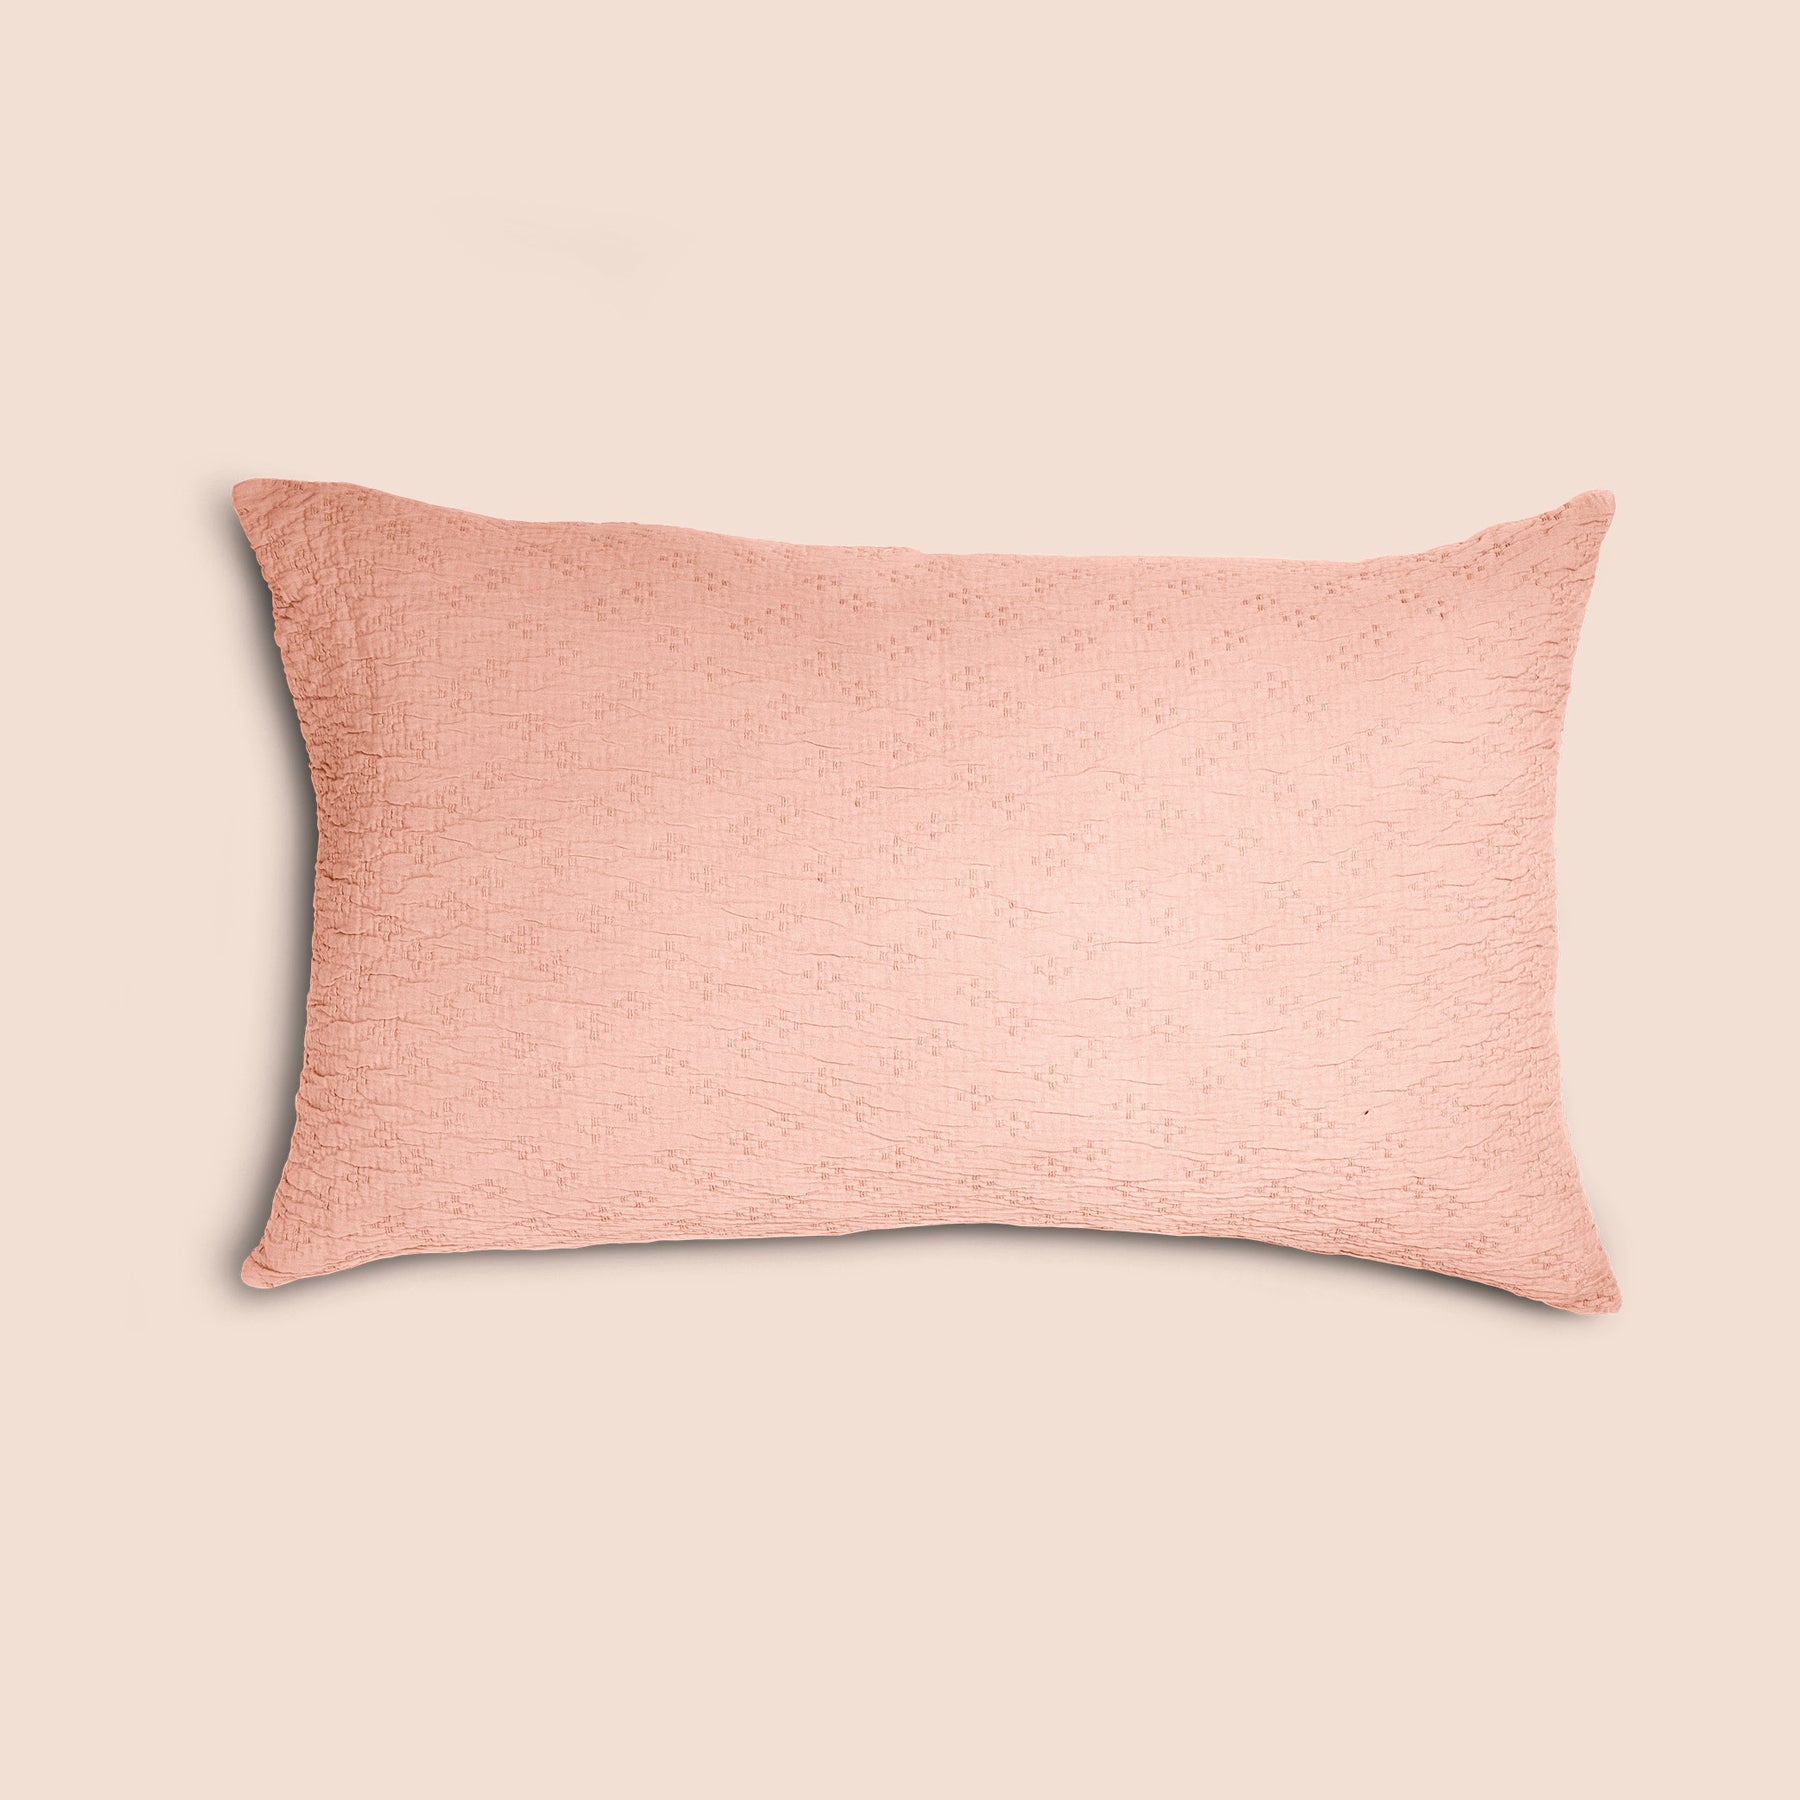 Image of a Pink Sandstone Wave Pillow Sham on a pillow with a light pink background